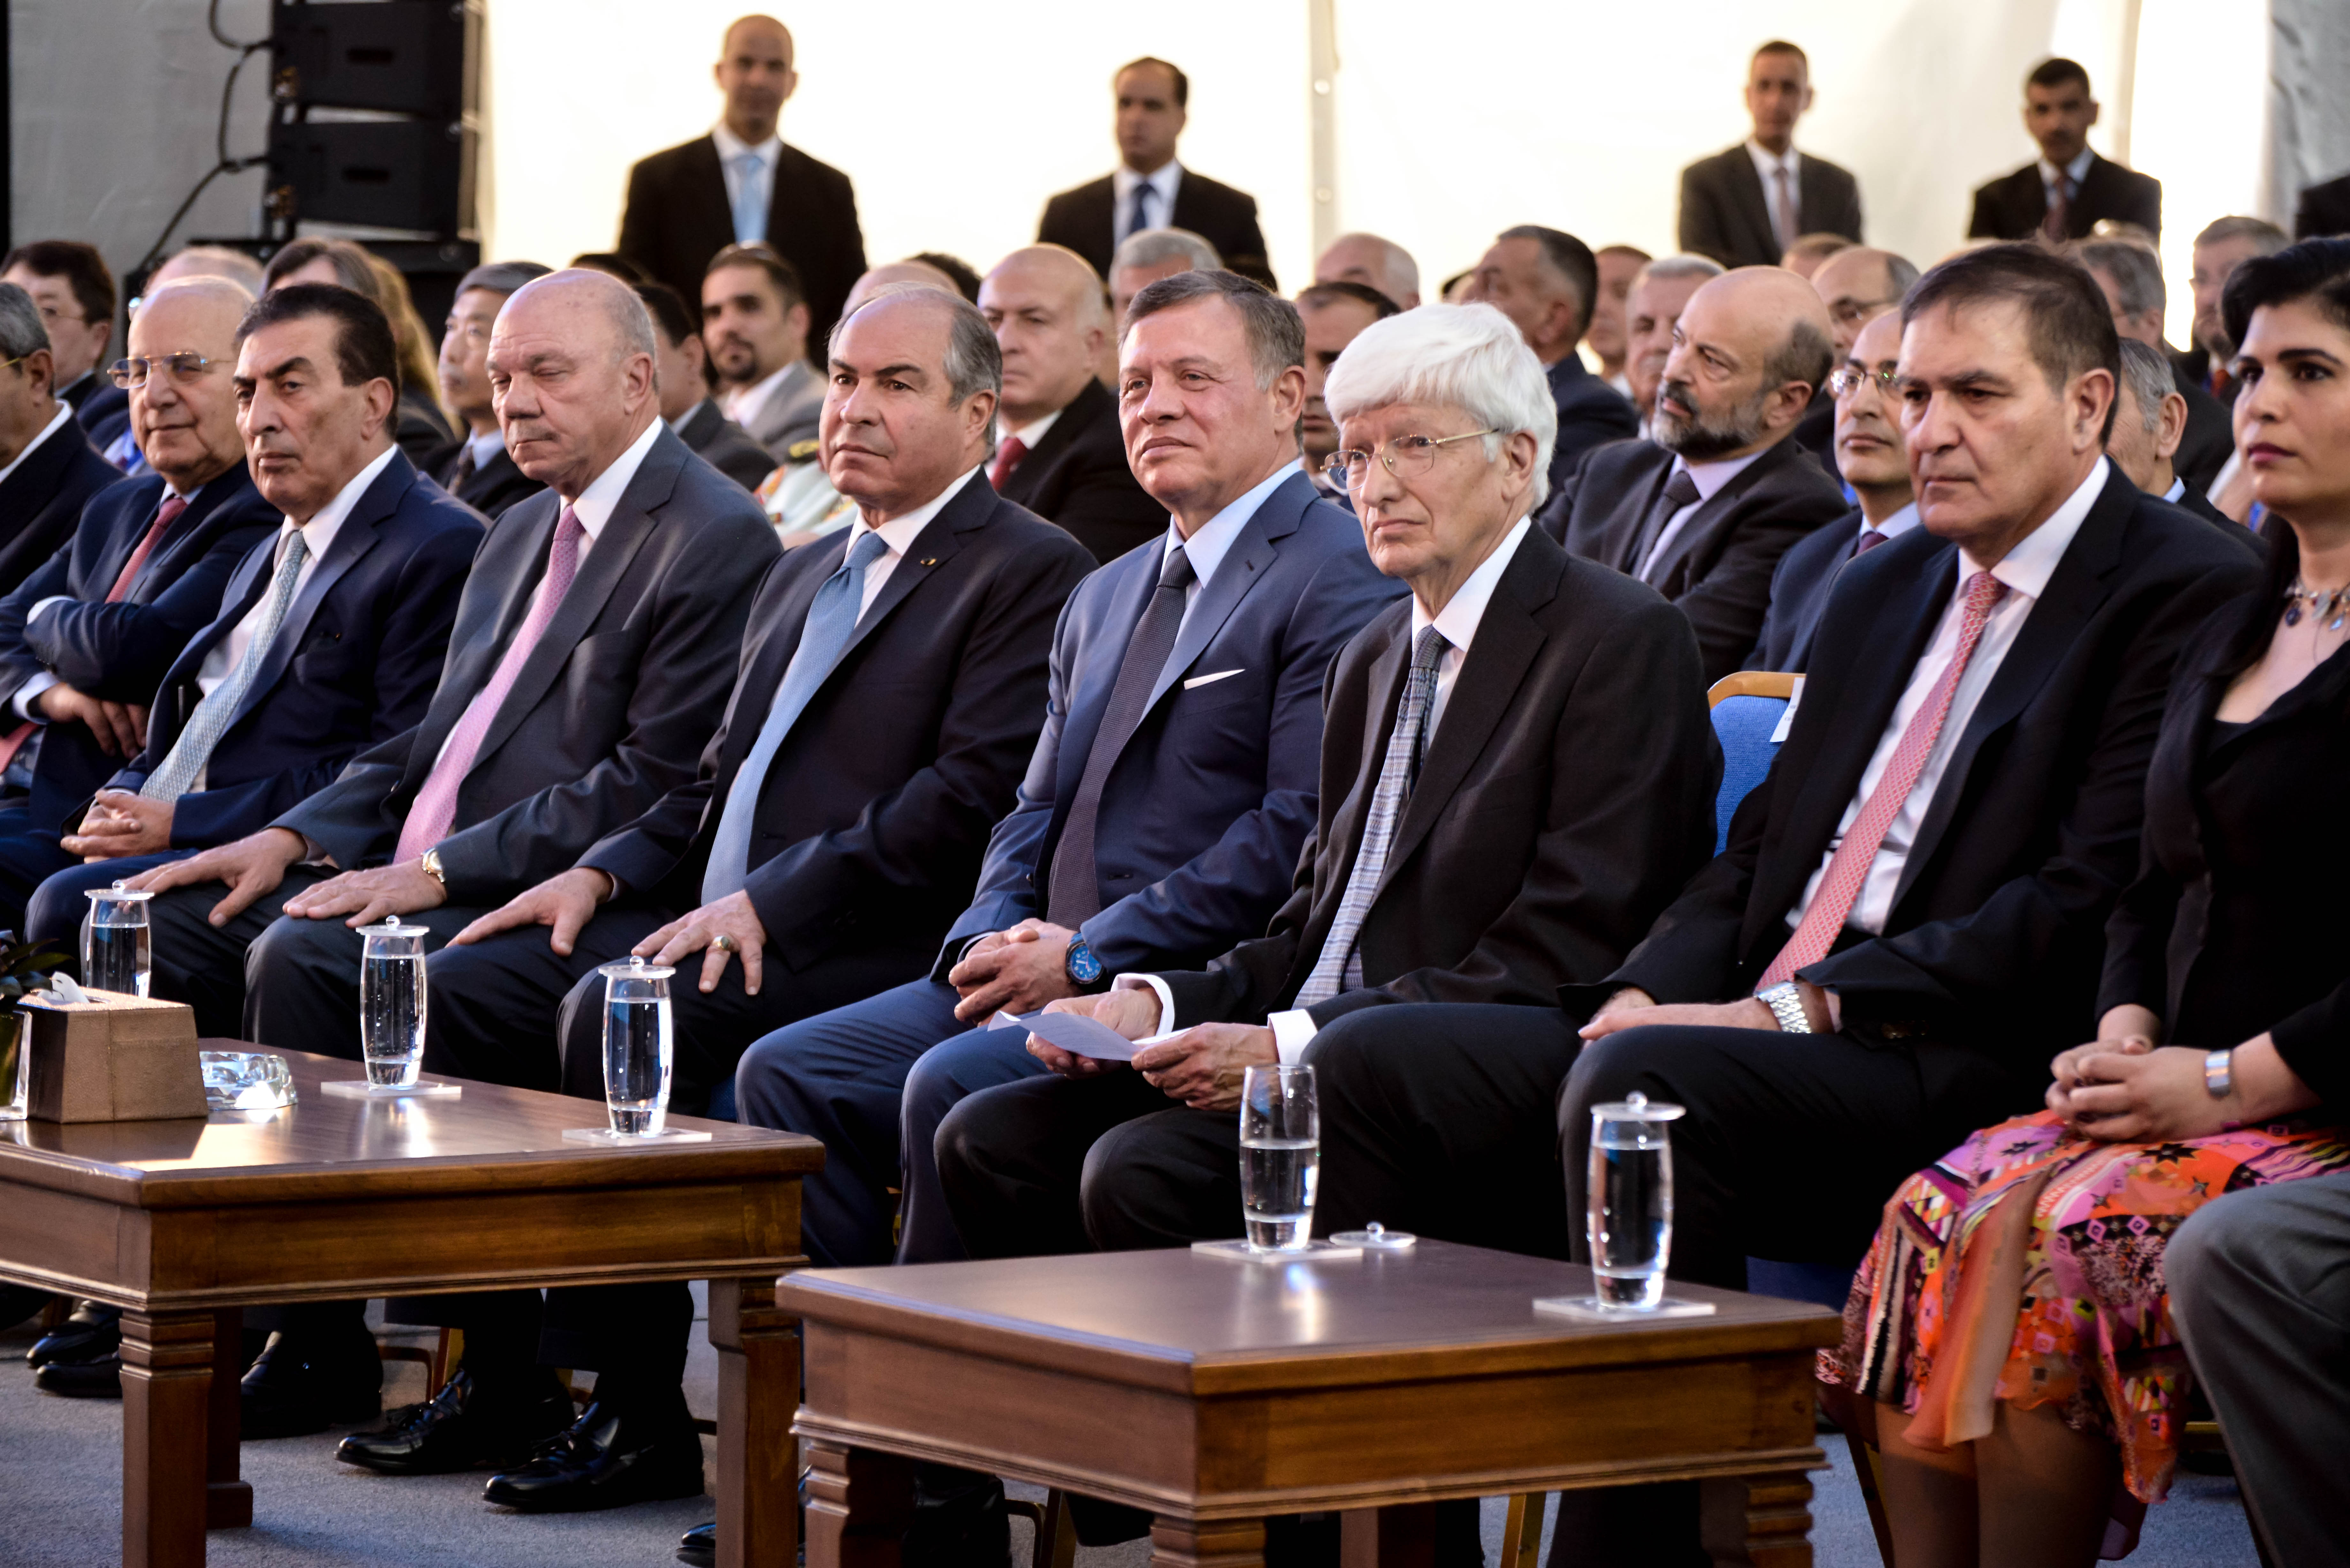 © SESAME: Some of the participants with in front row HM King Abdullah II flanked by (left) the President of the Council and the Director of SESAME and (right) the Prime Minister of Jordan